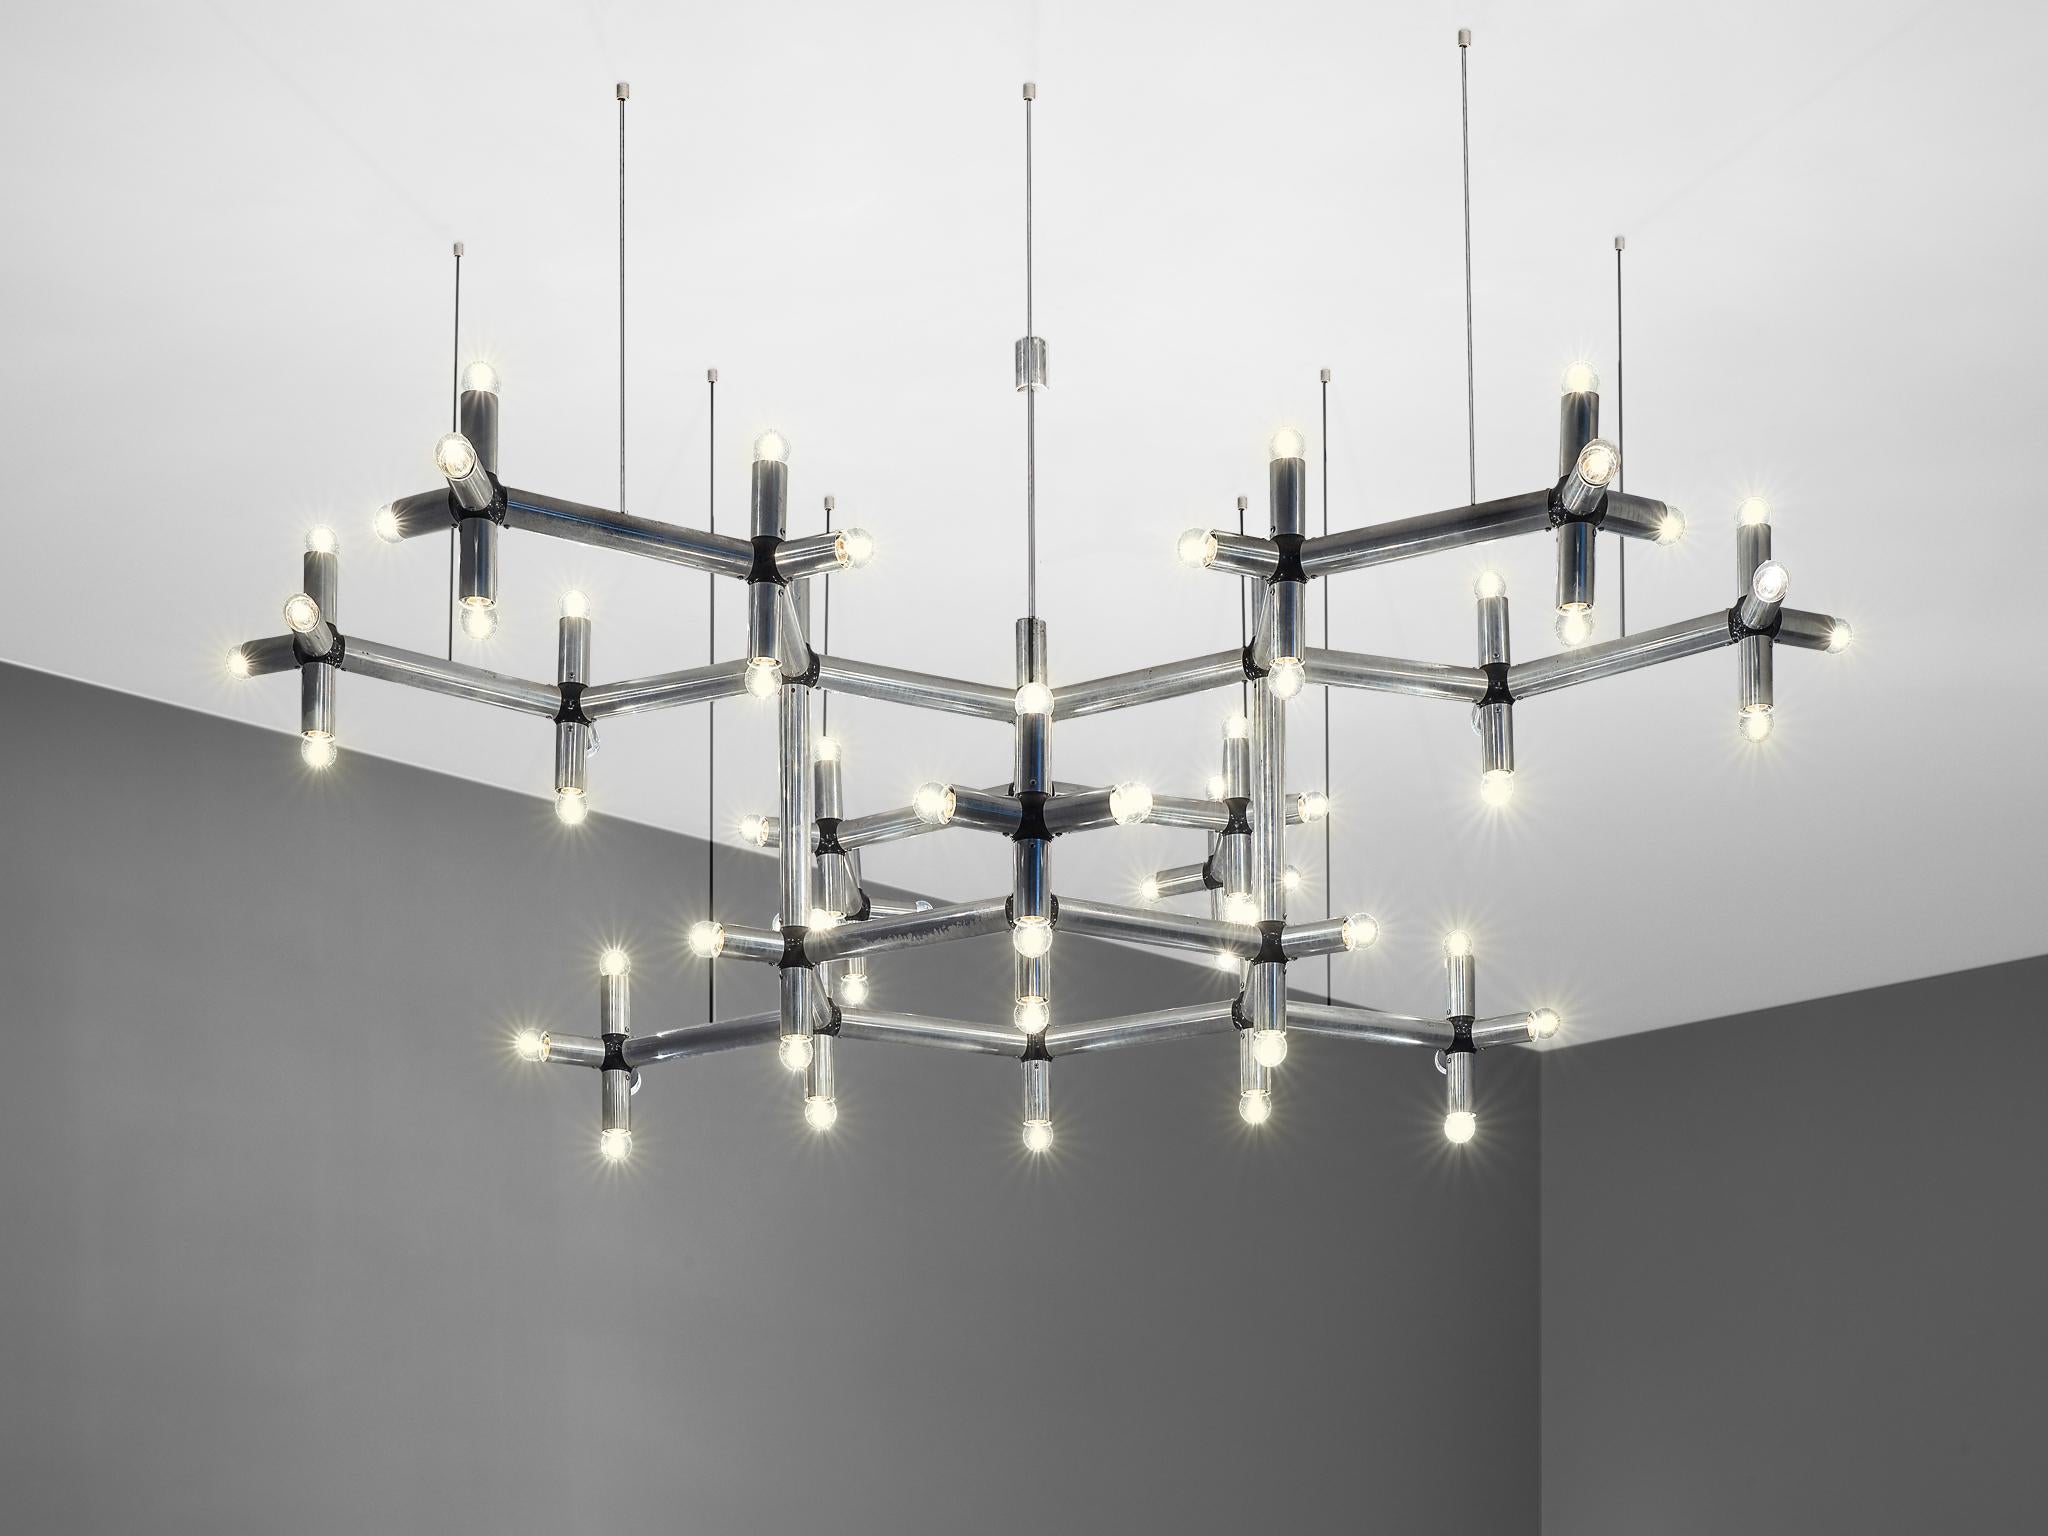 Robert Haussmann, chandelier, polished steel with 70 bulbs, Europe, 1970s.

This beautiful chandelier is executed in chromed steel and features a frame that spreads out as if it were a natural entity. The frame consists of multiple branches that are